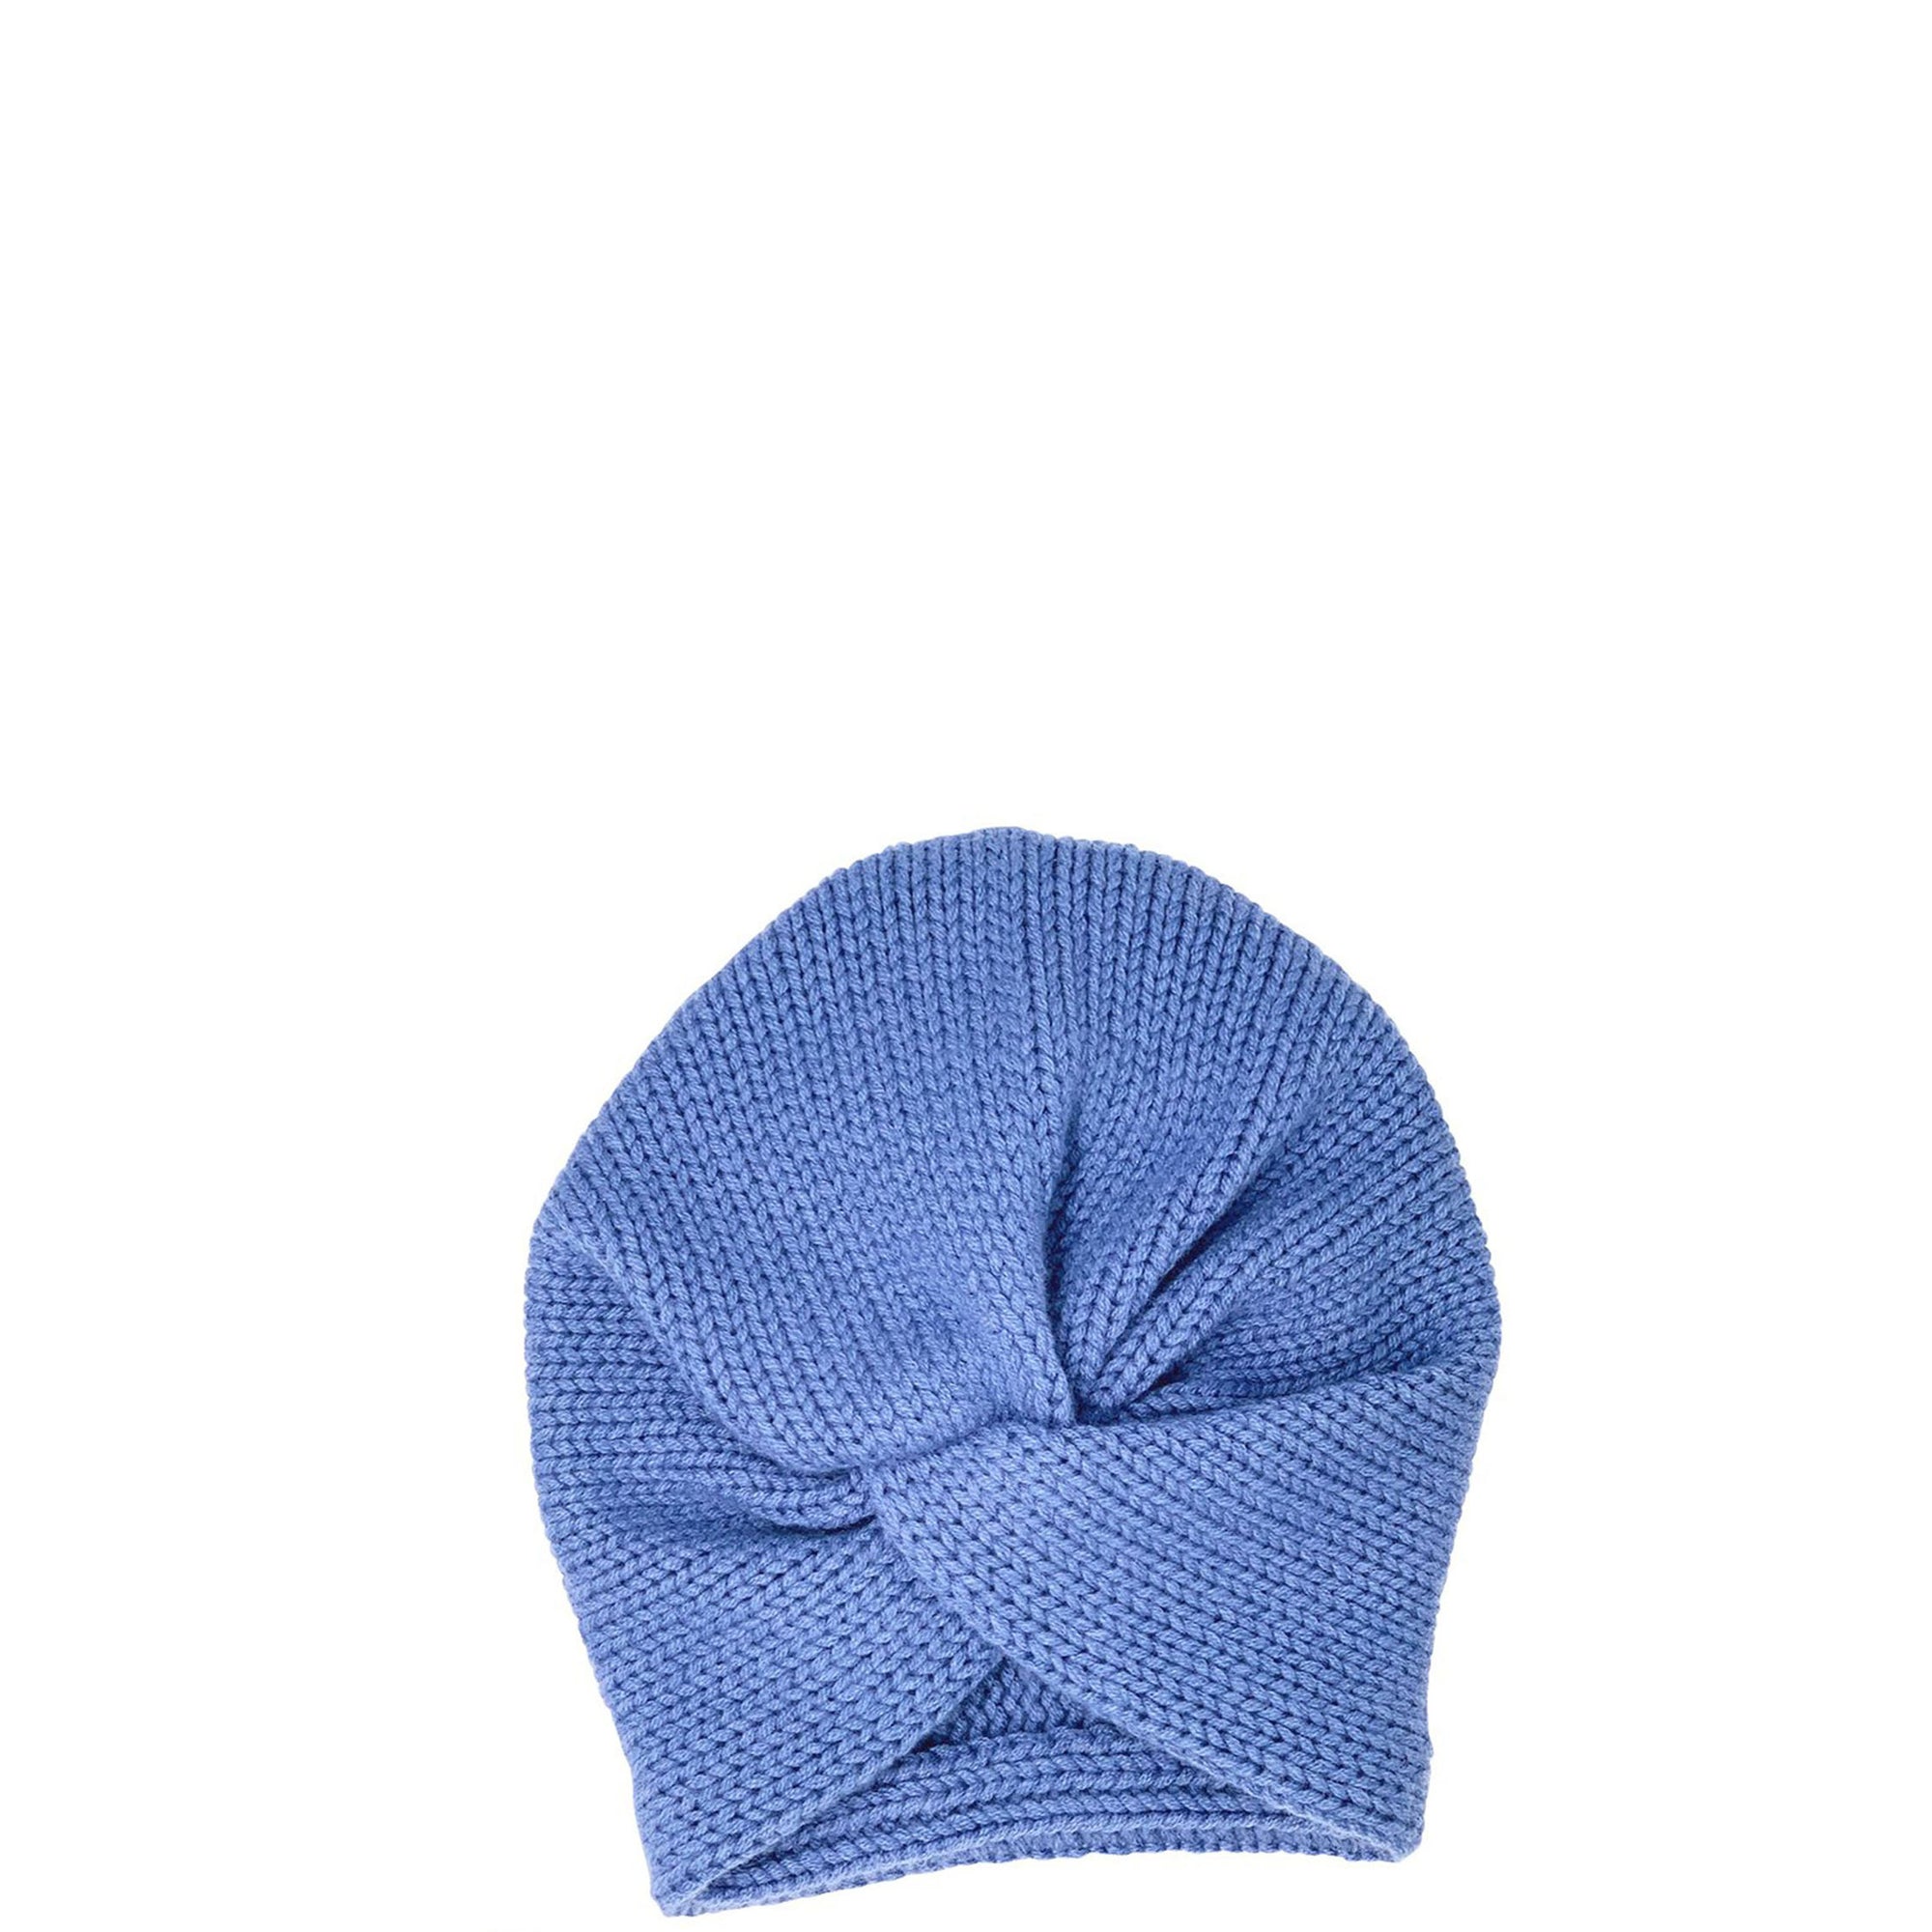 PETITE CALIN Kaschmir turban, Cashmere turban, Blue, Sustainable cashmere, Kaschmir, Mütze, Handmade, Zero waste, Fair trade, Organic, Handcrafted, Handmade, Made in Europe, Made in Germany, Female Empowerment, Shop now - the wearness online-shop - ETHICAL & SUSTAINABLE LUXURY FASHION 